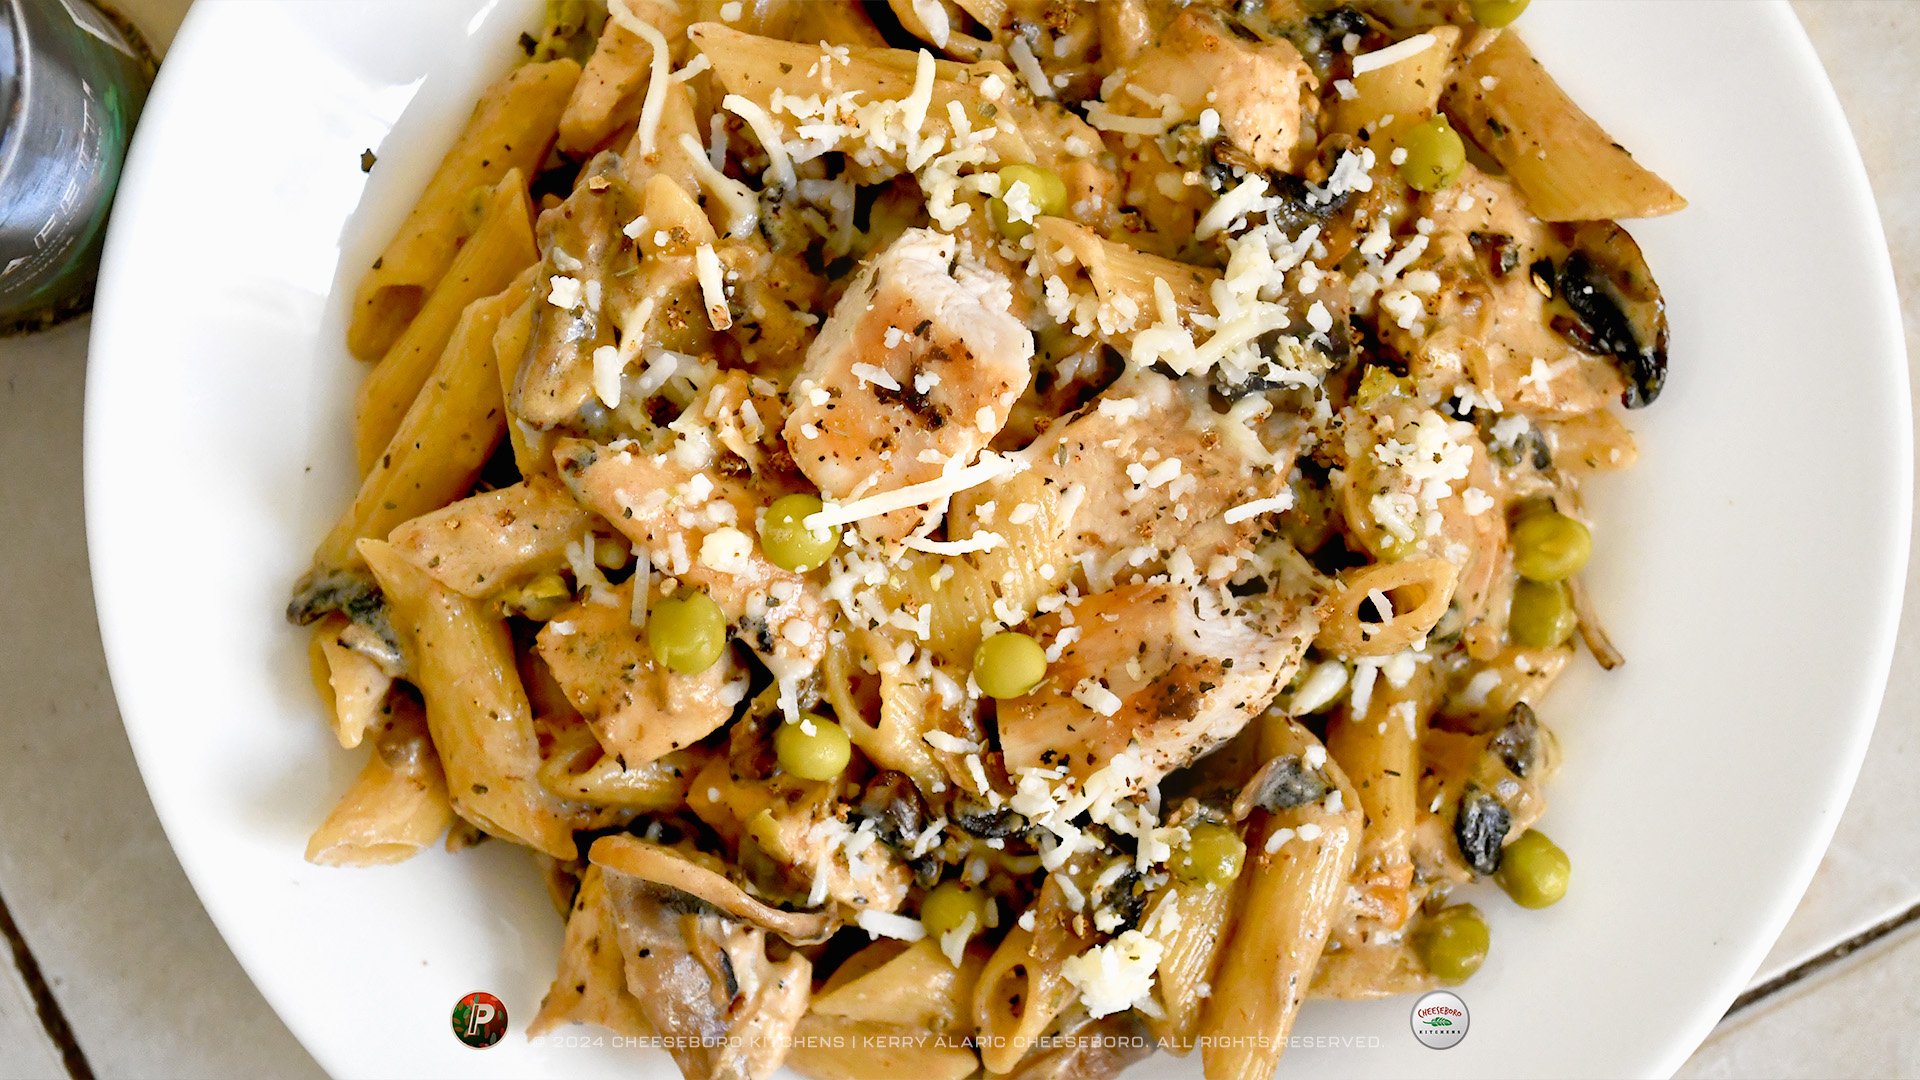 cheeskitch-240201-pizzafetti-penne-chicken-mushrooms-top-view-1-1920-hor.jpg